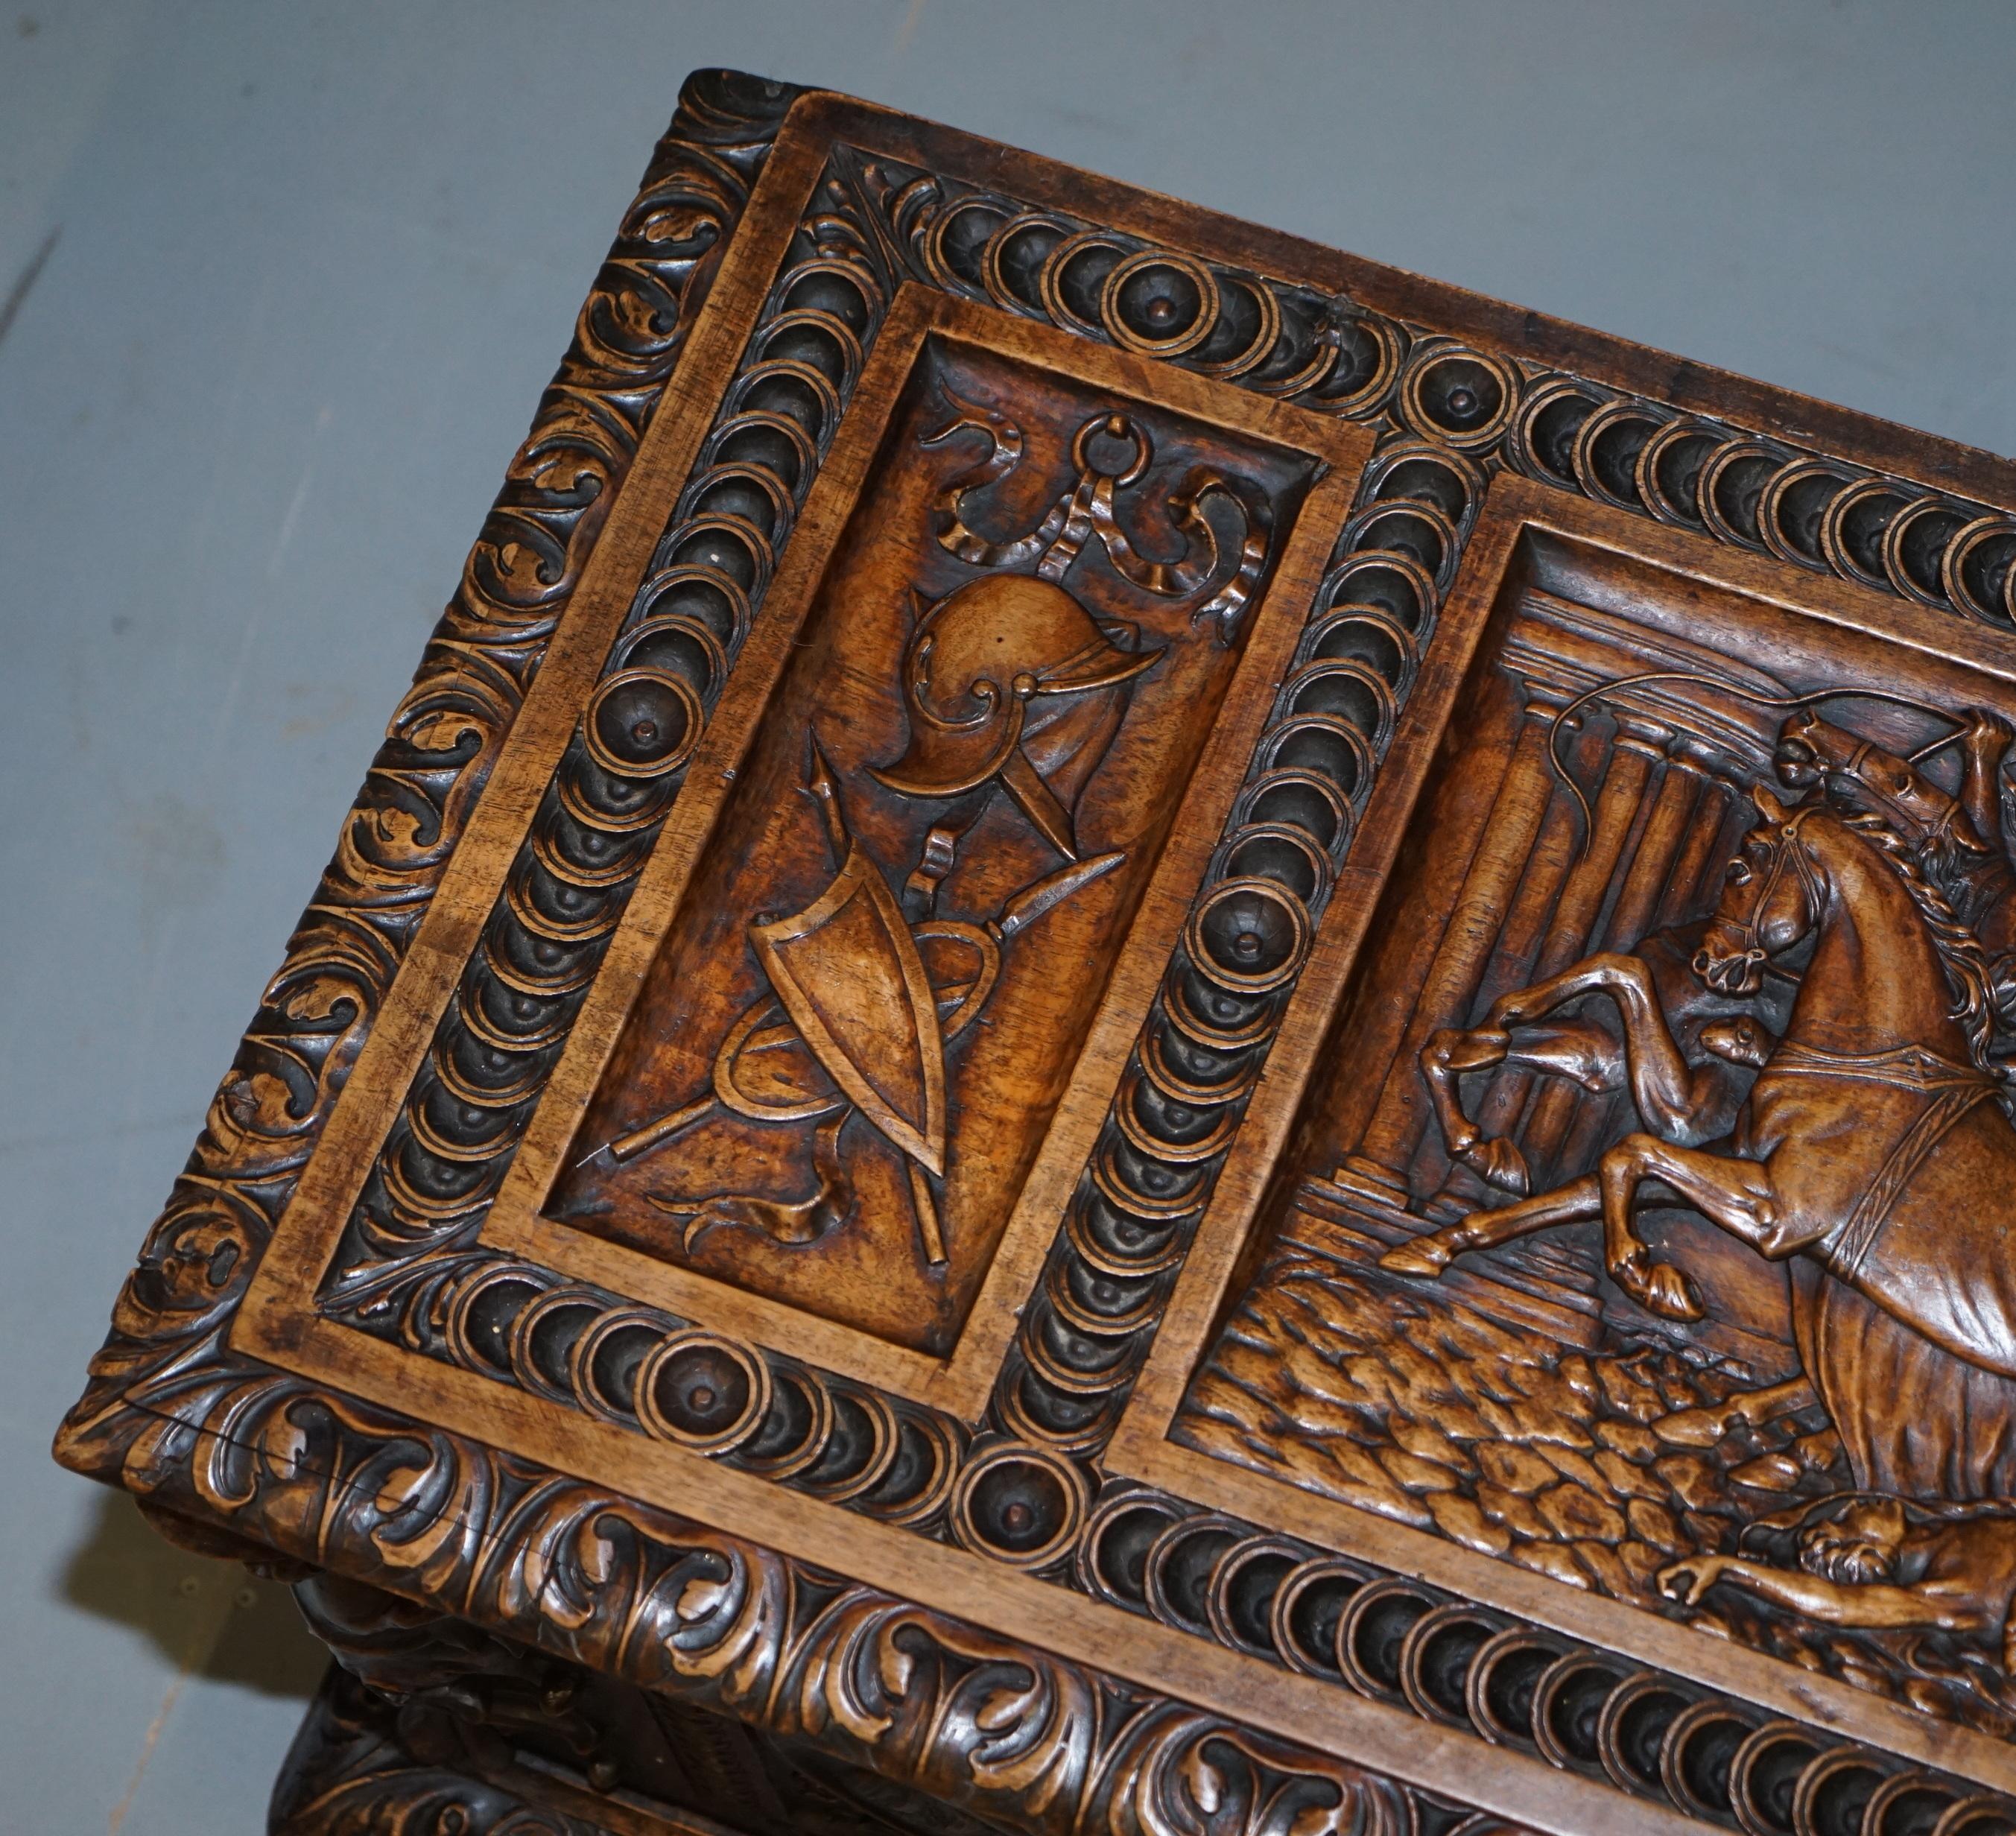 19th Century Sublime Roman Chariot Ornately Hand Carved Antique Walnut Trunk Chest or Coffer